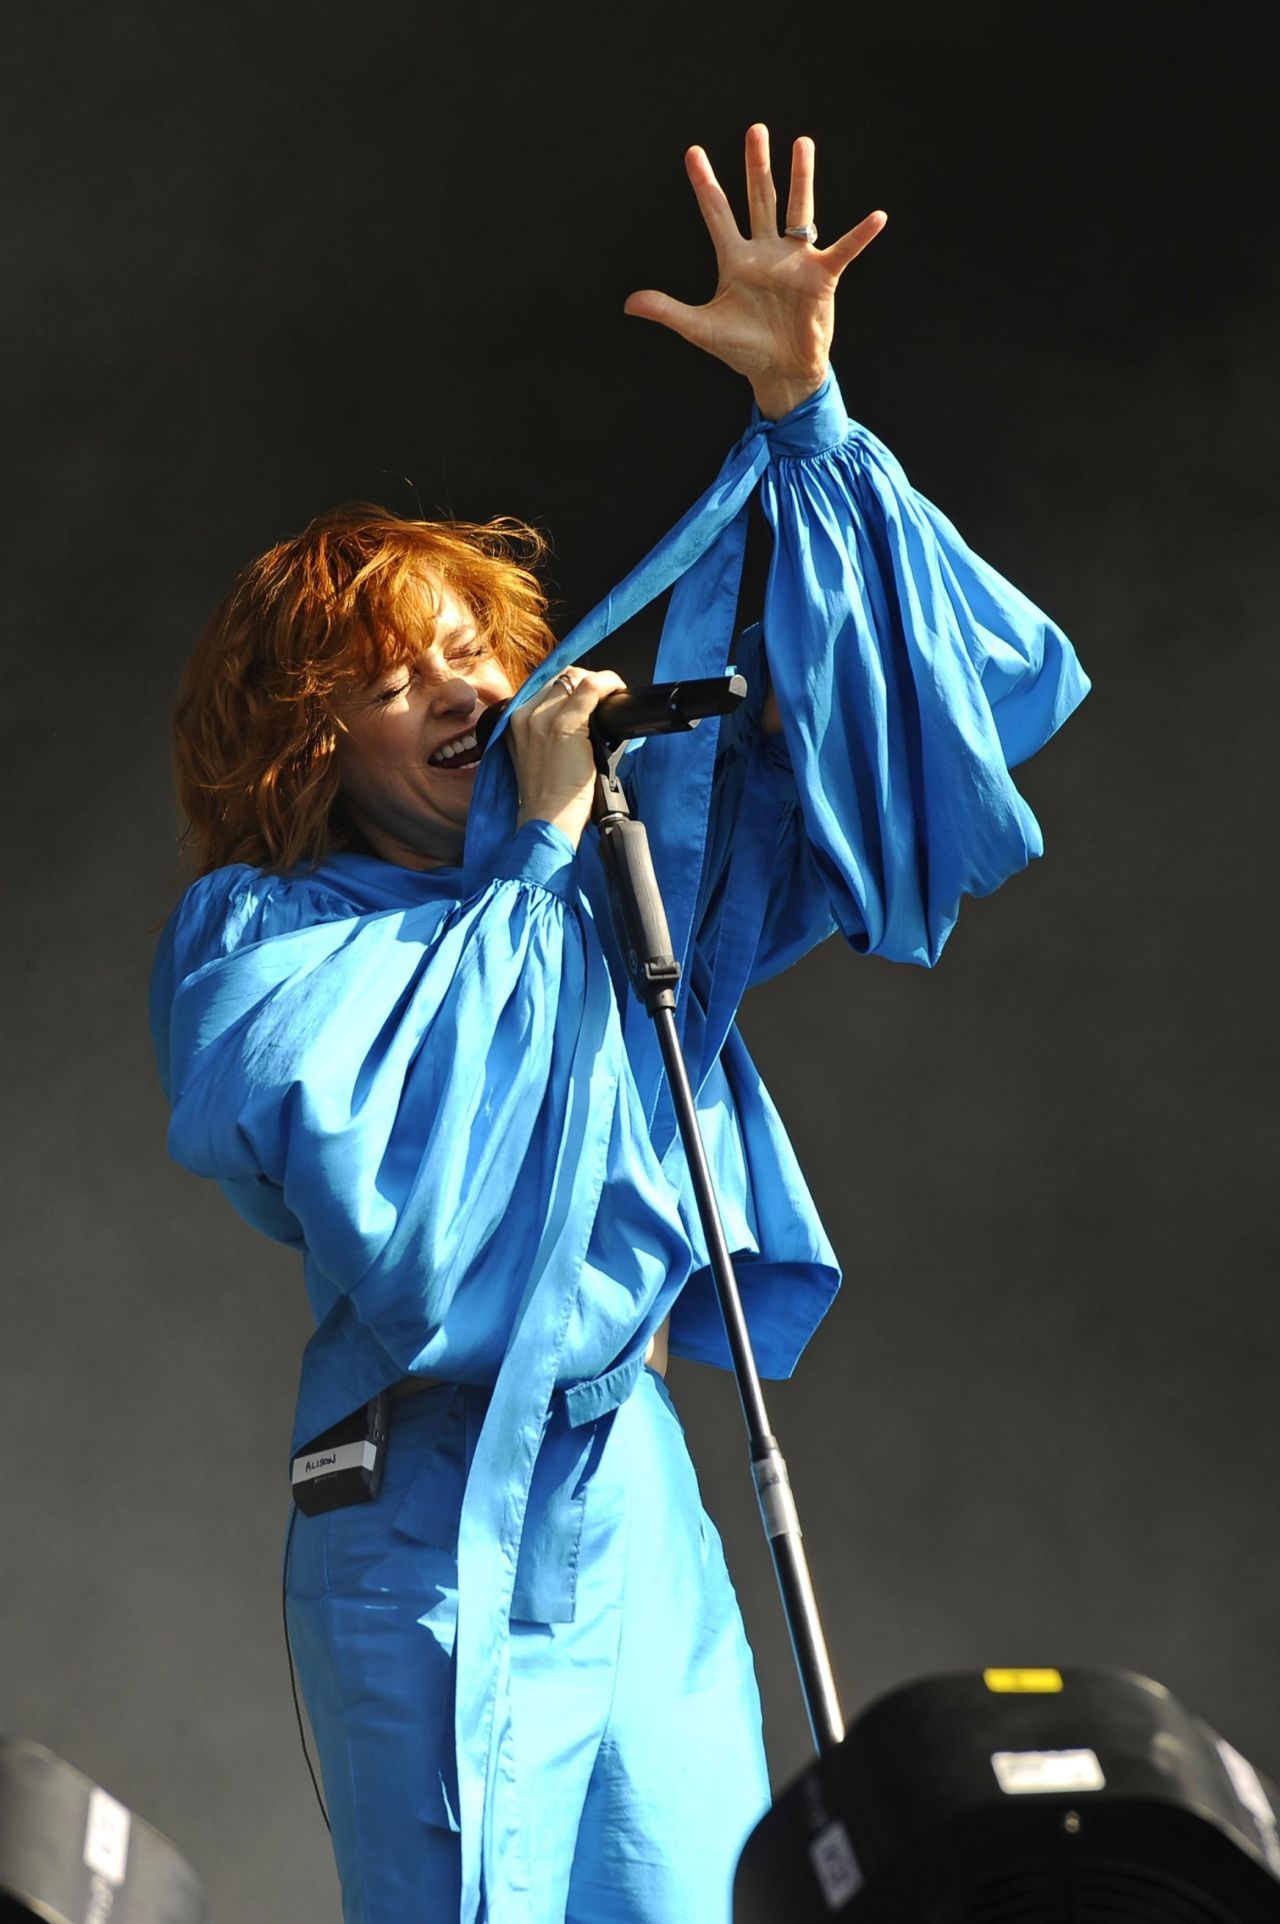 alison-goldfrapp-performs-at-british-summer-time-2018-in-london-1.jpg